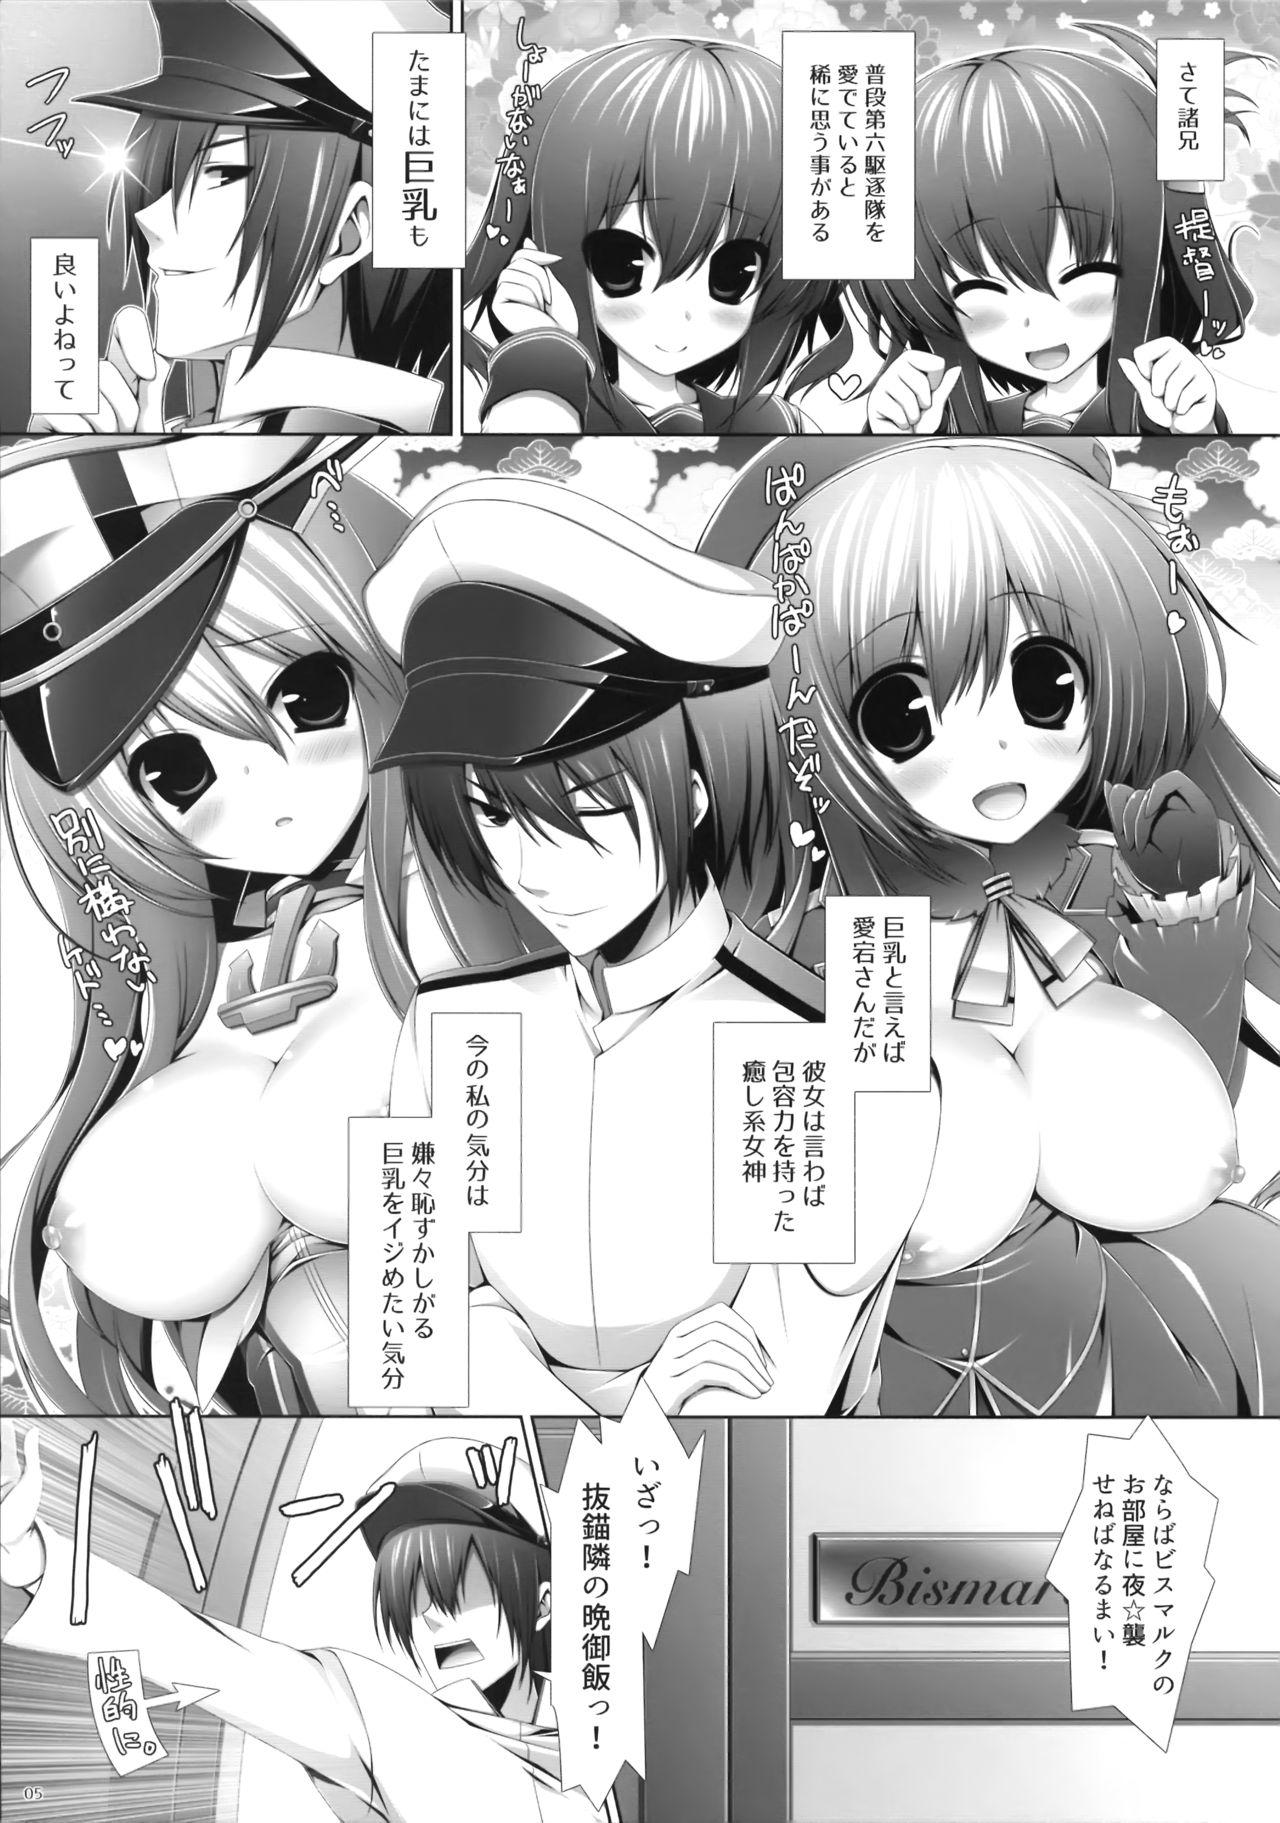 Hot Whores Night battle ship girls - Kantai collection Hoe - Page 4